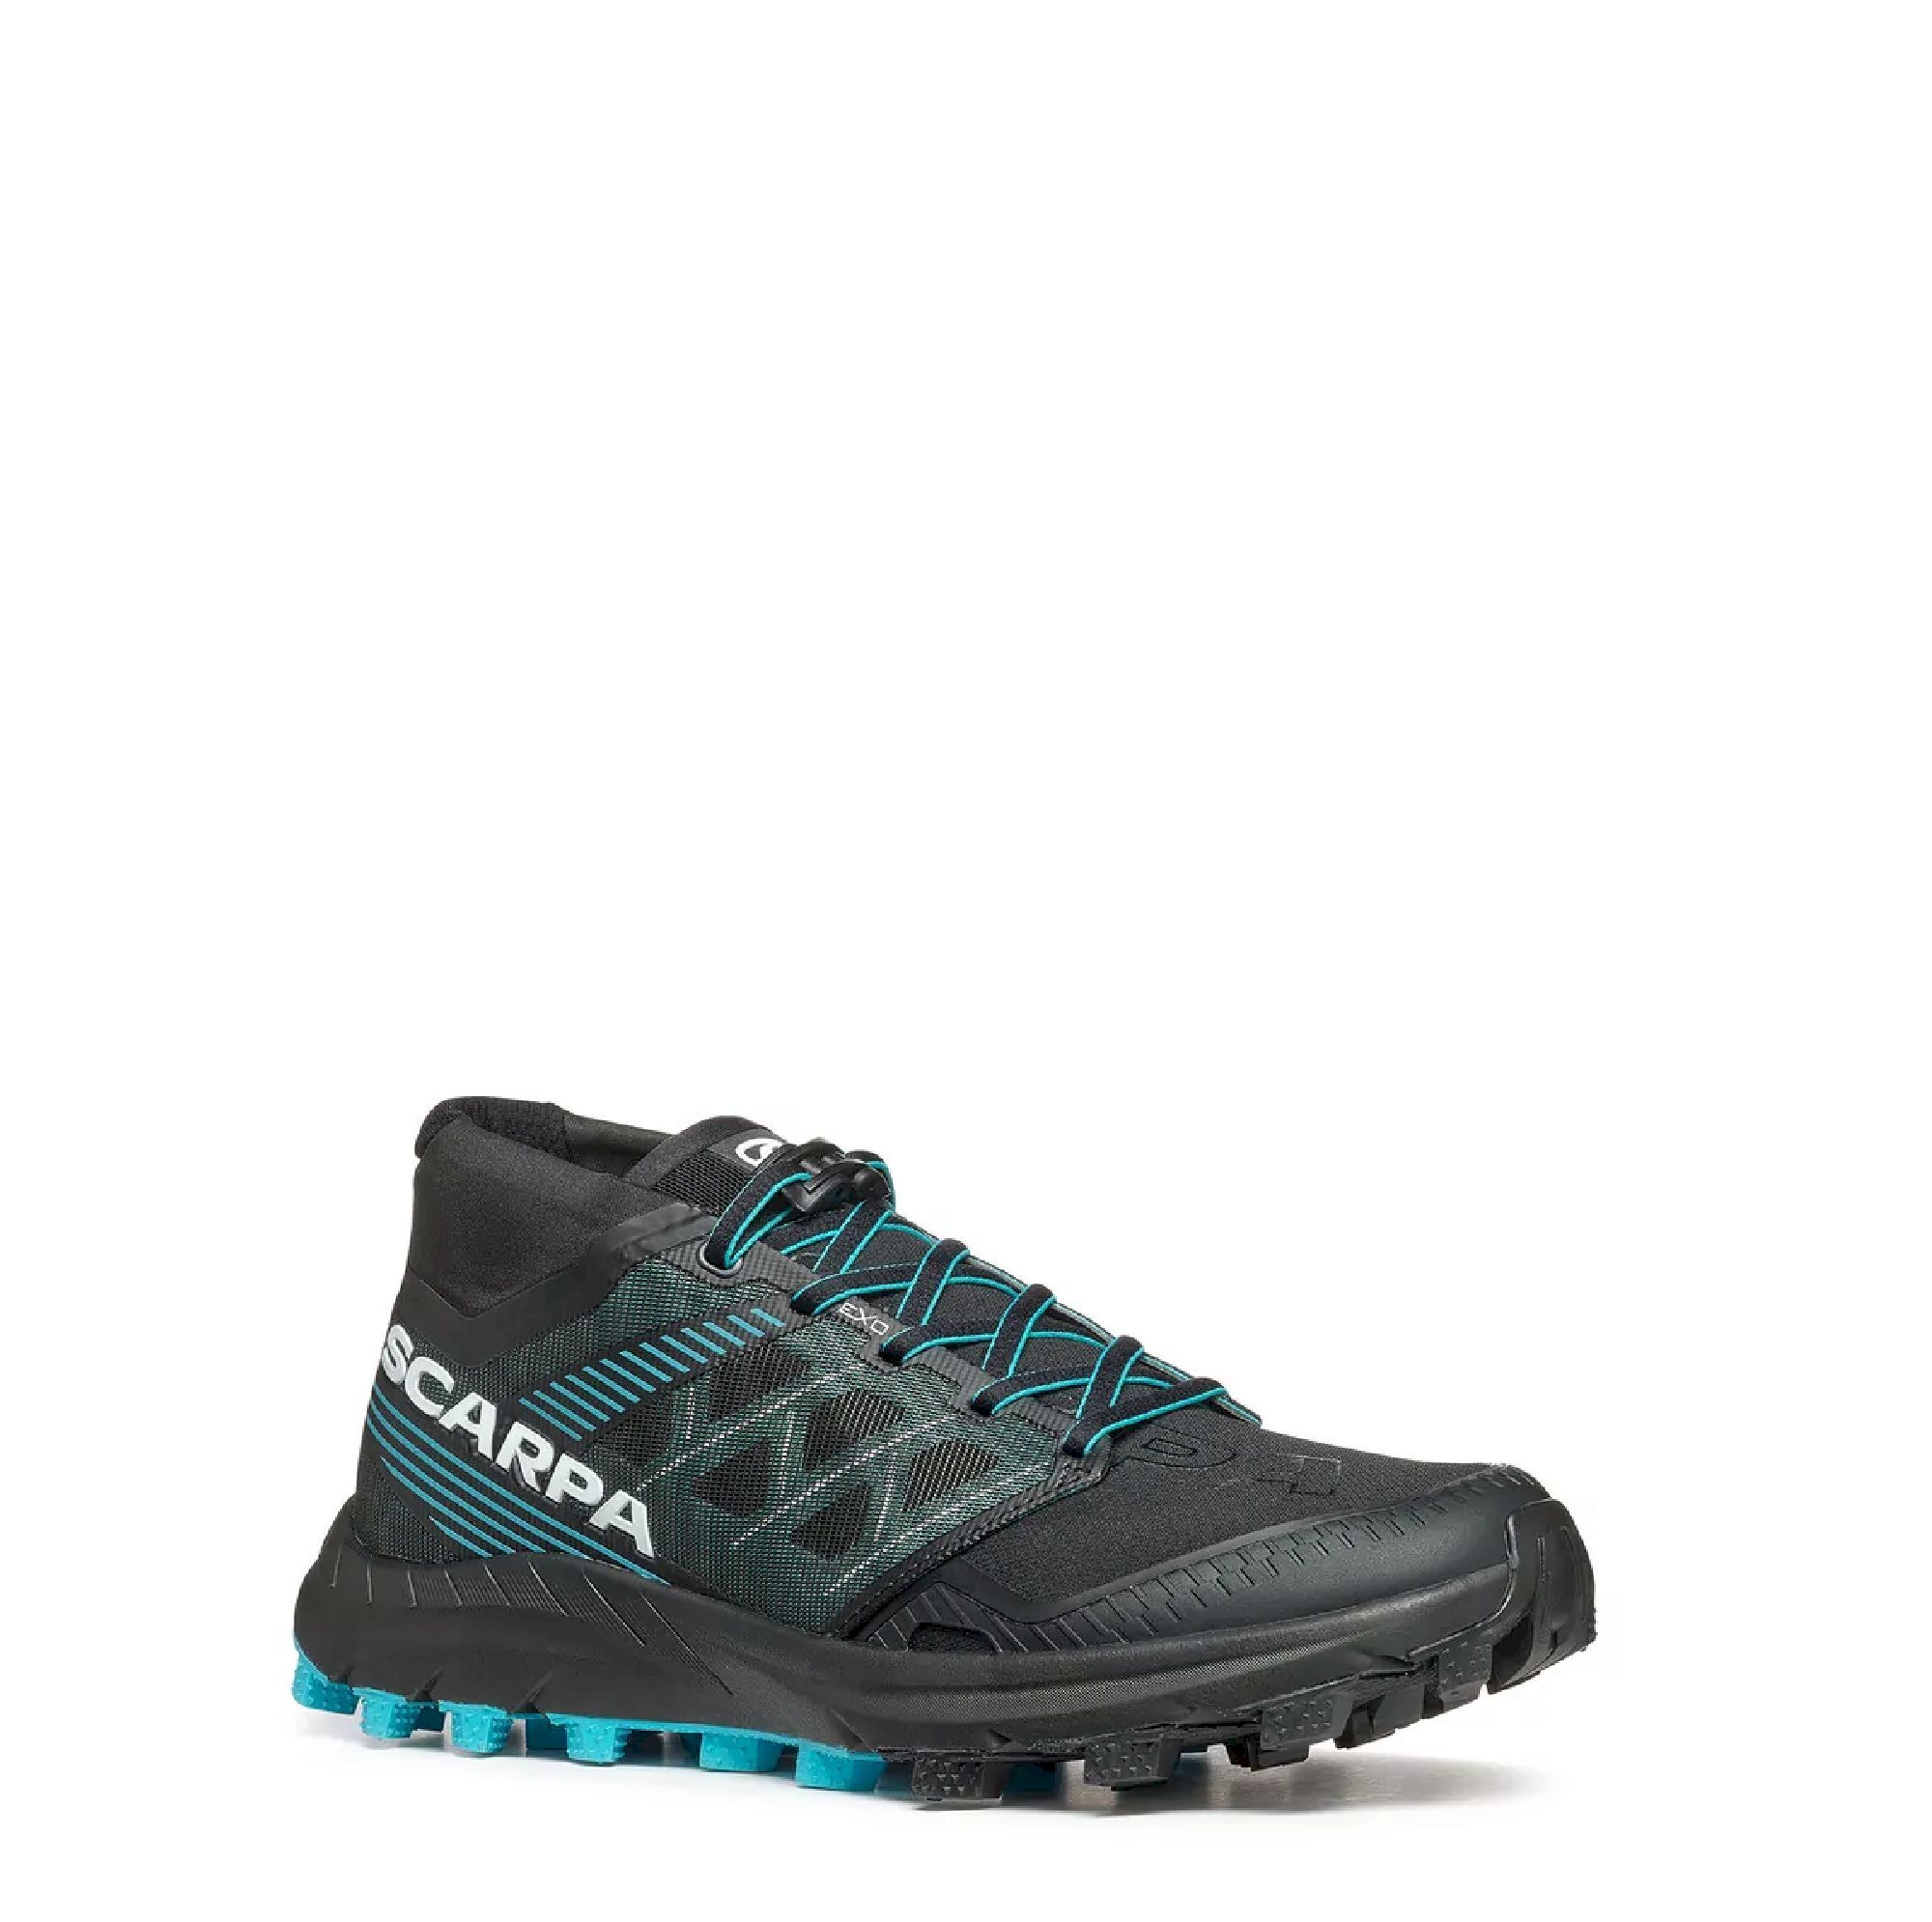 Scarpa Spin ST - Trail running shoes - Men's | Hardloop